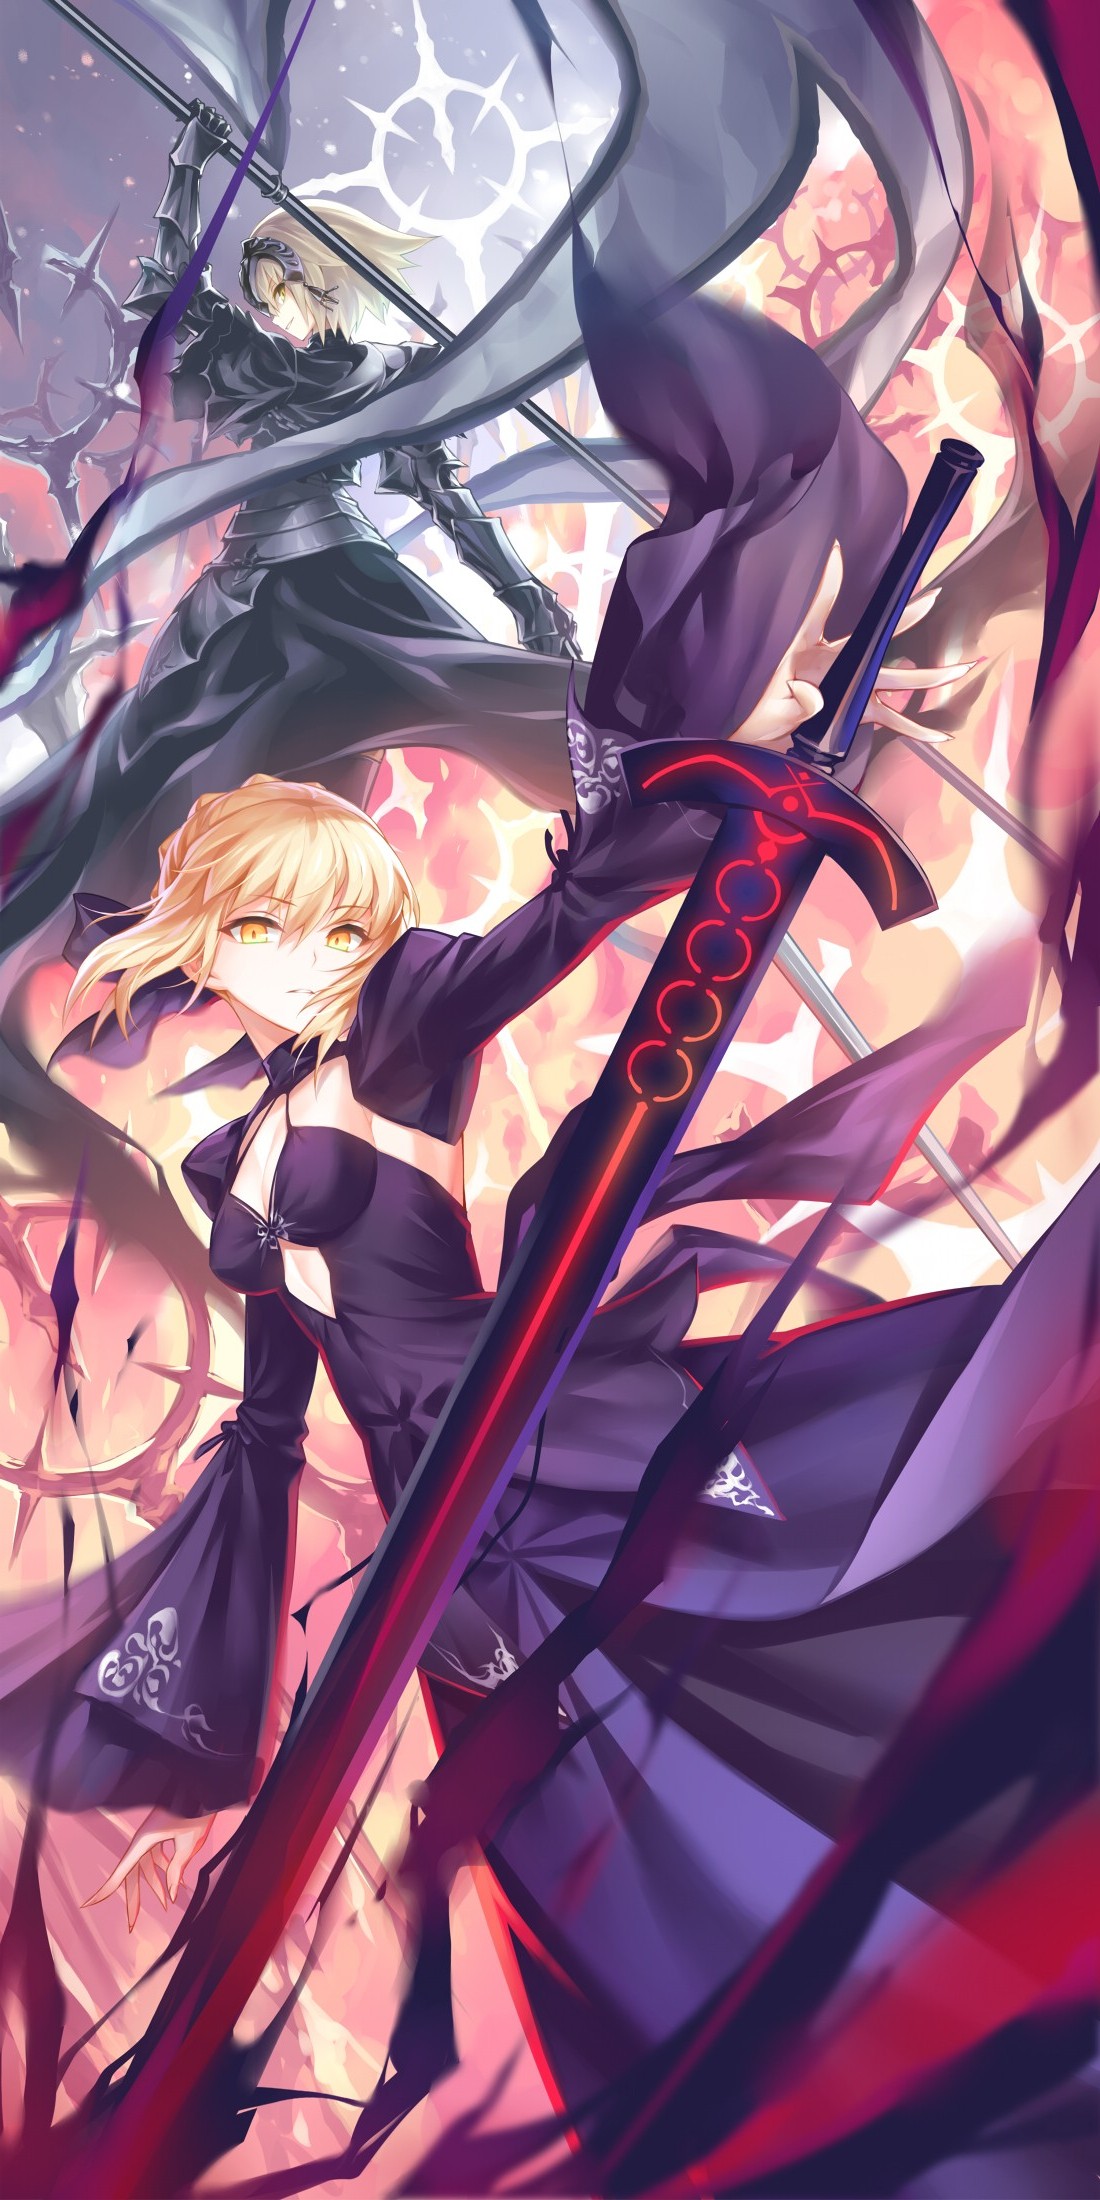 Saber Alter Ruler Fate Grand Order Fate Series Wallpapers Hd Desktop And Mobile Backgrounds